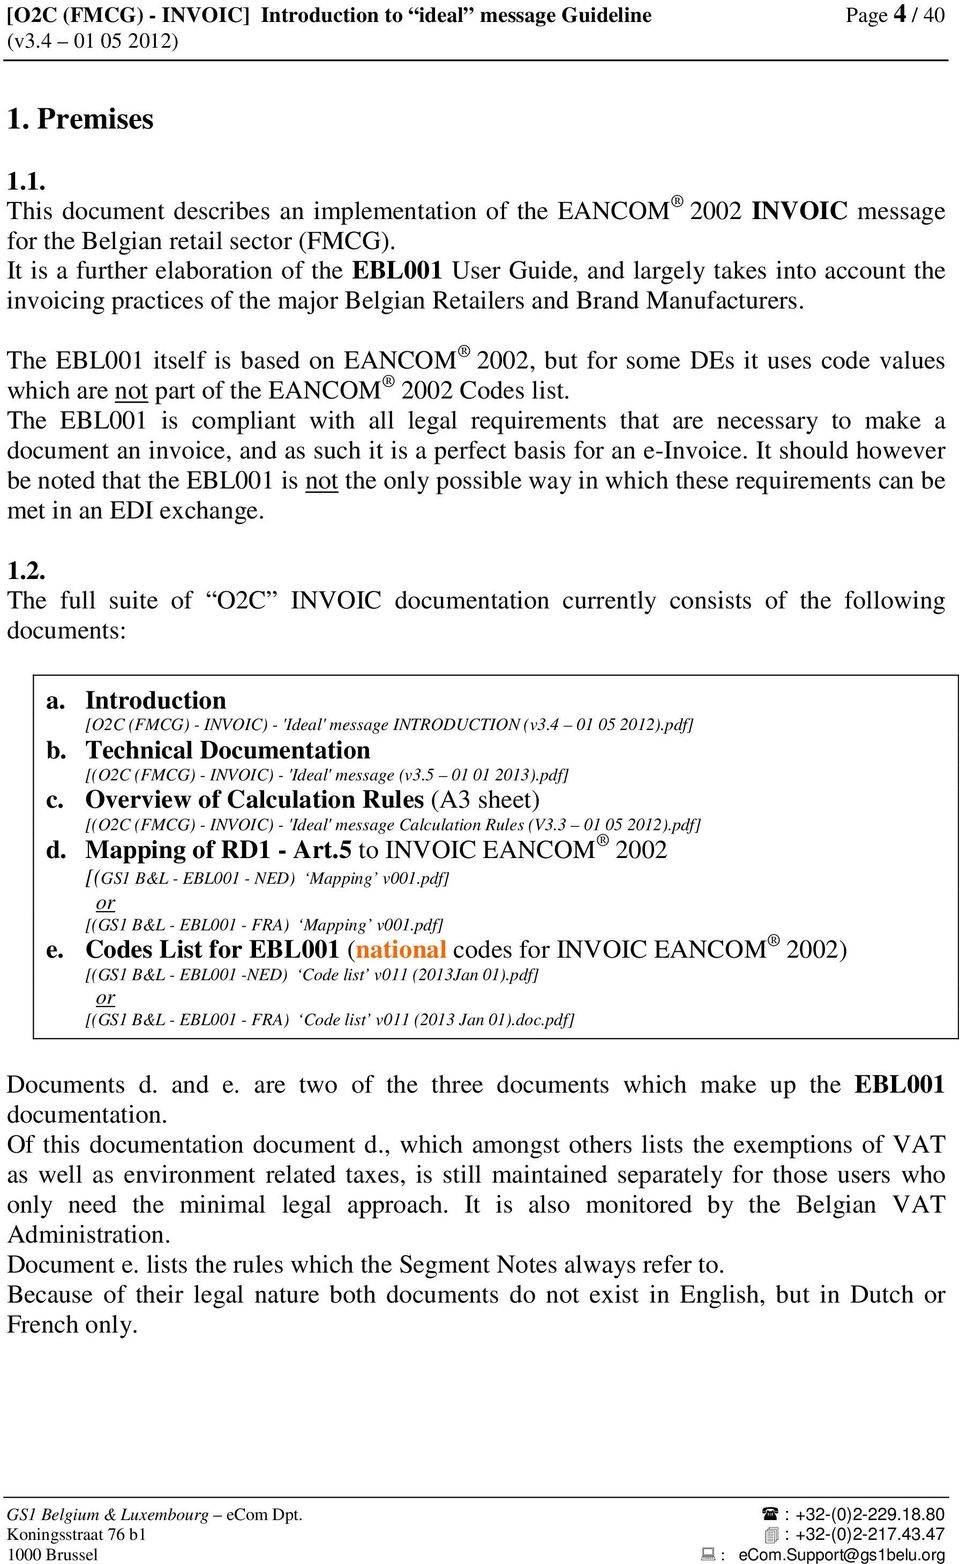 The EBL001 itself is based on EANCOM 2002, but for some DEs it uses code values which are not part of the EANCOM 2002 Codes list.